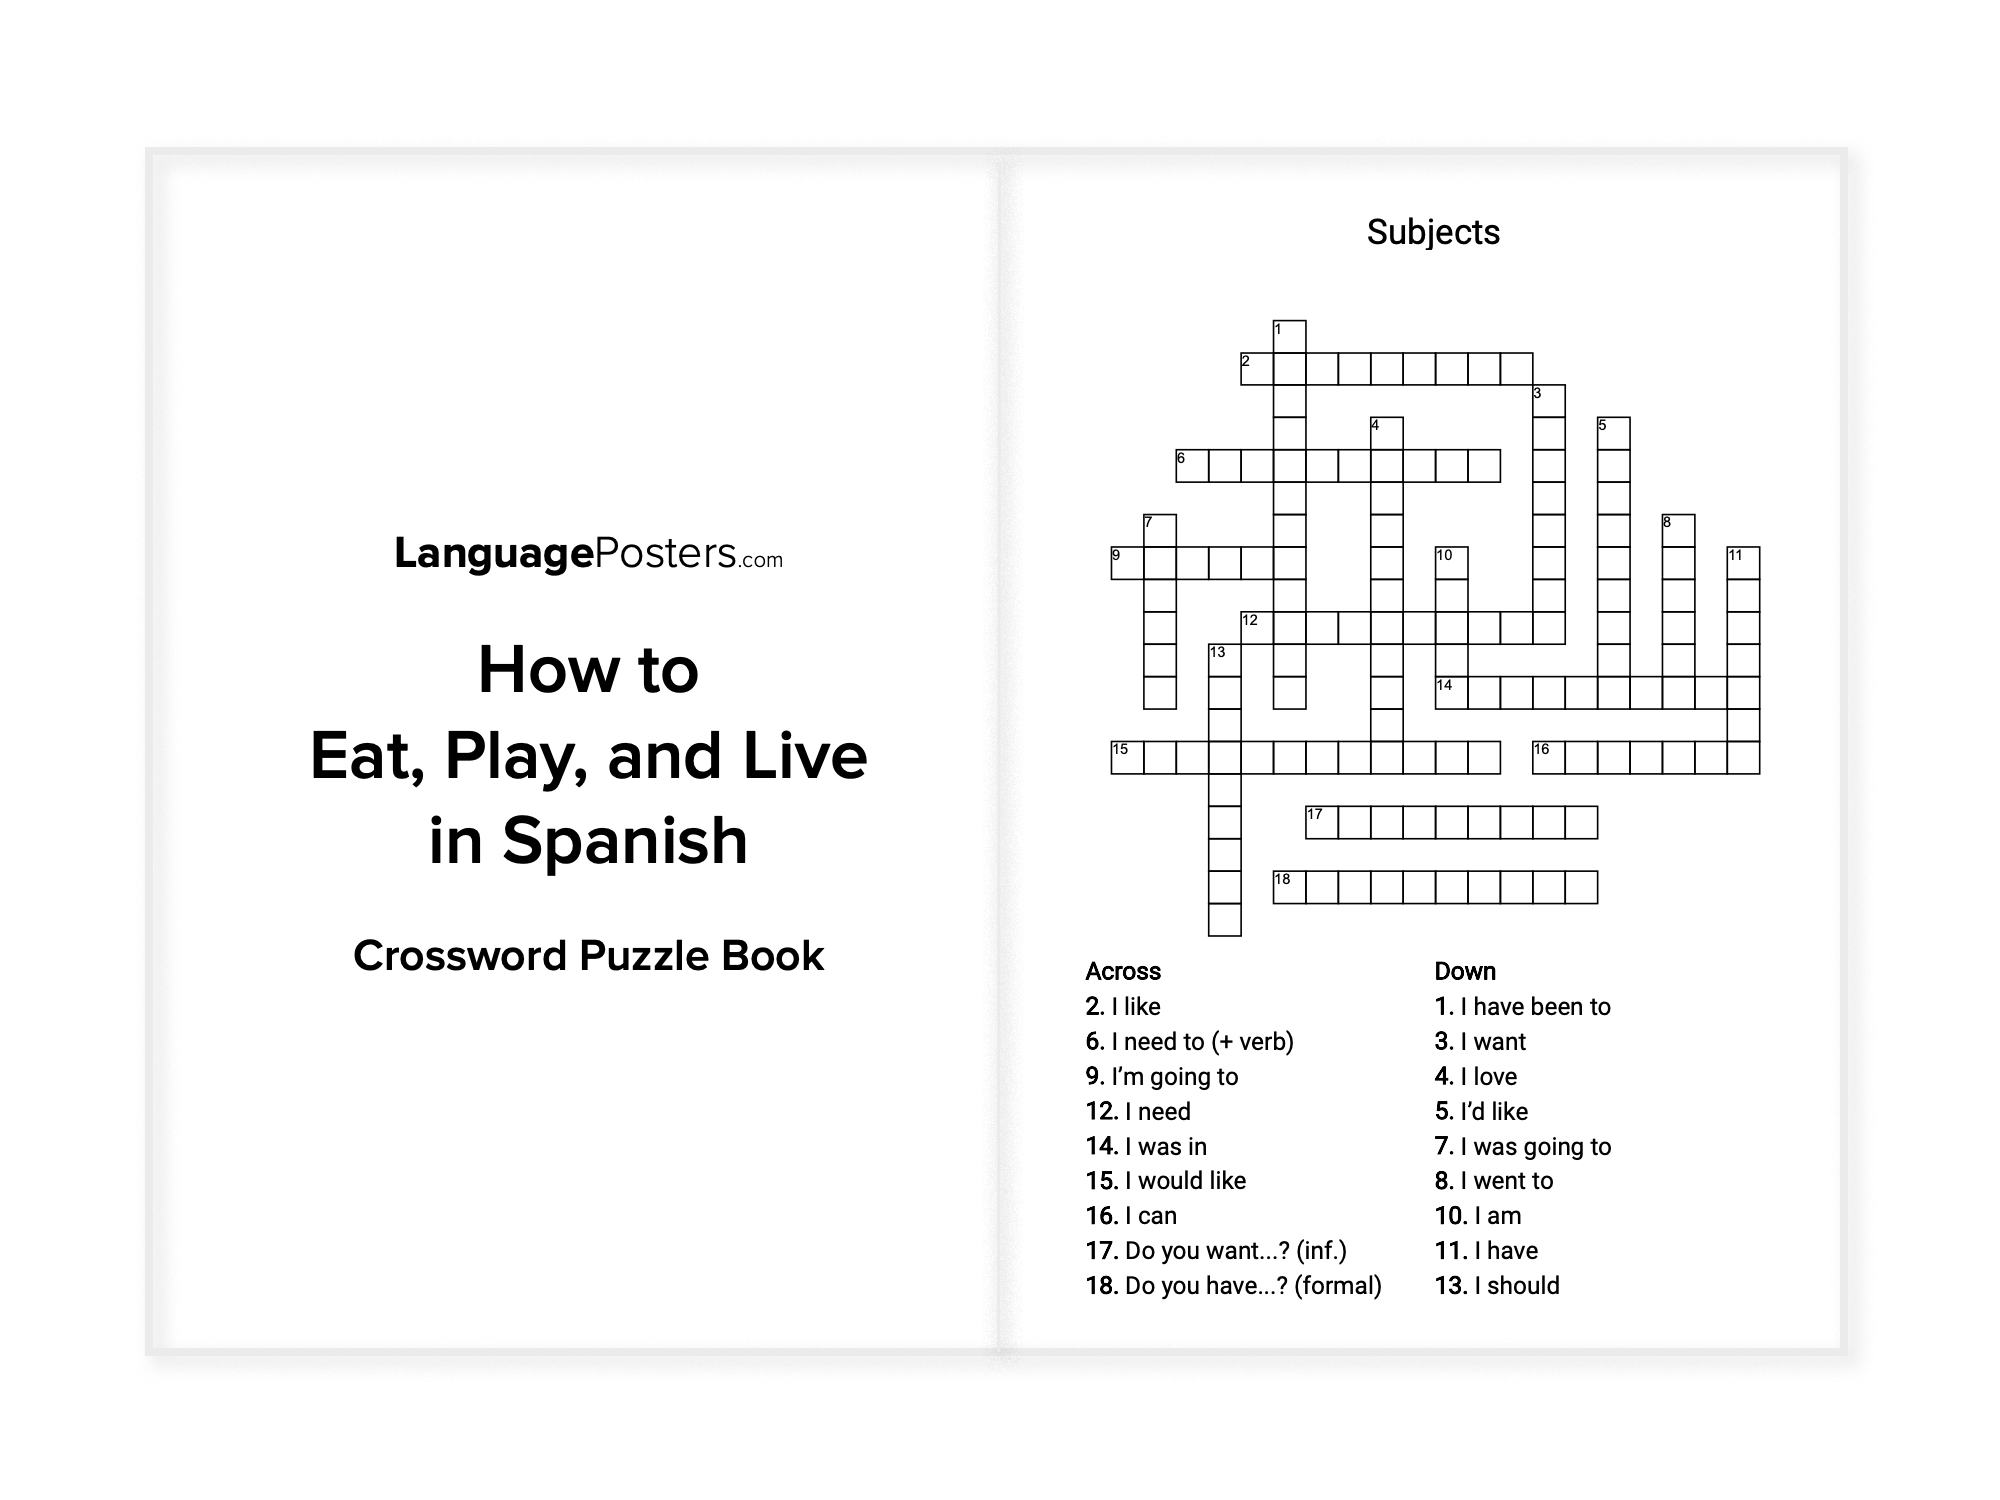 LanguagePosters.com - How to Eat, Play, and Live in Spanish Crossword Puzzle Book Preview